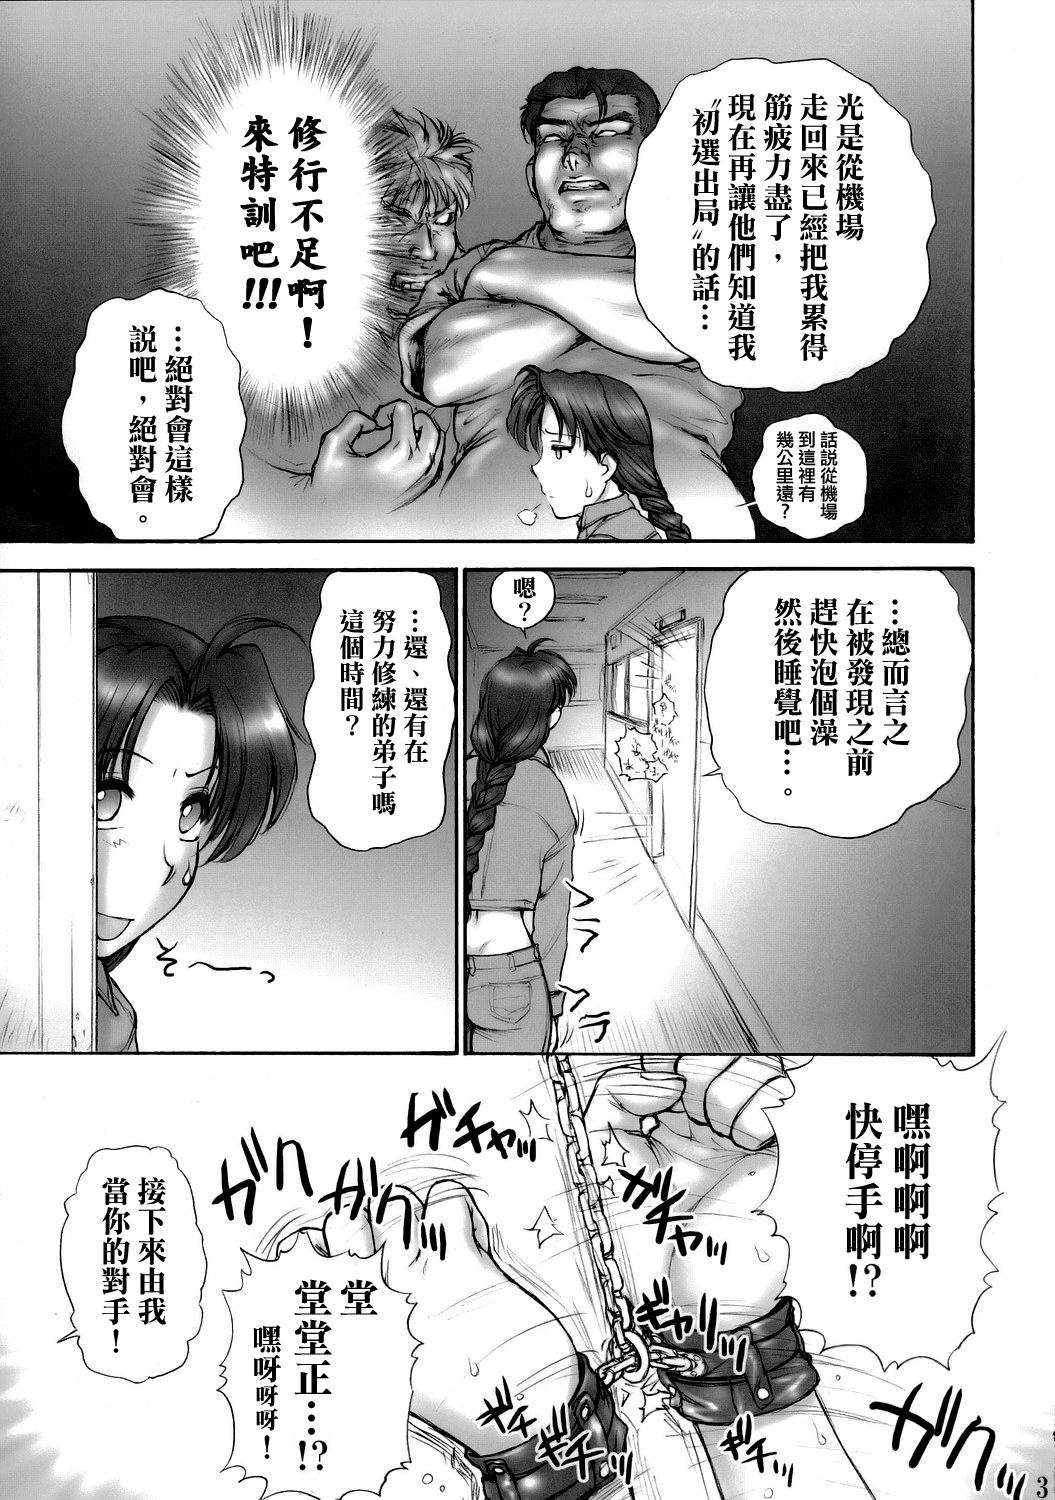 Club (SC29) [Shinnihon Pepsitou (St. Germain-sal)] Report Concerning Kyoku-gen-ryuu (The King of Fighters) [Chinese] [日祈漢化] - King of fighters Woman Fucking - Page 5